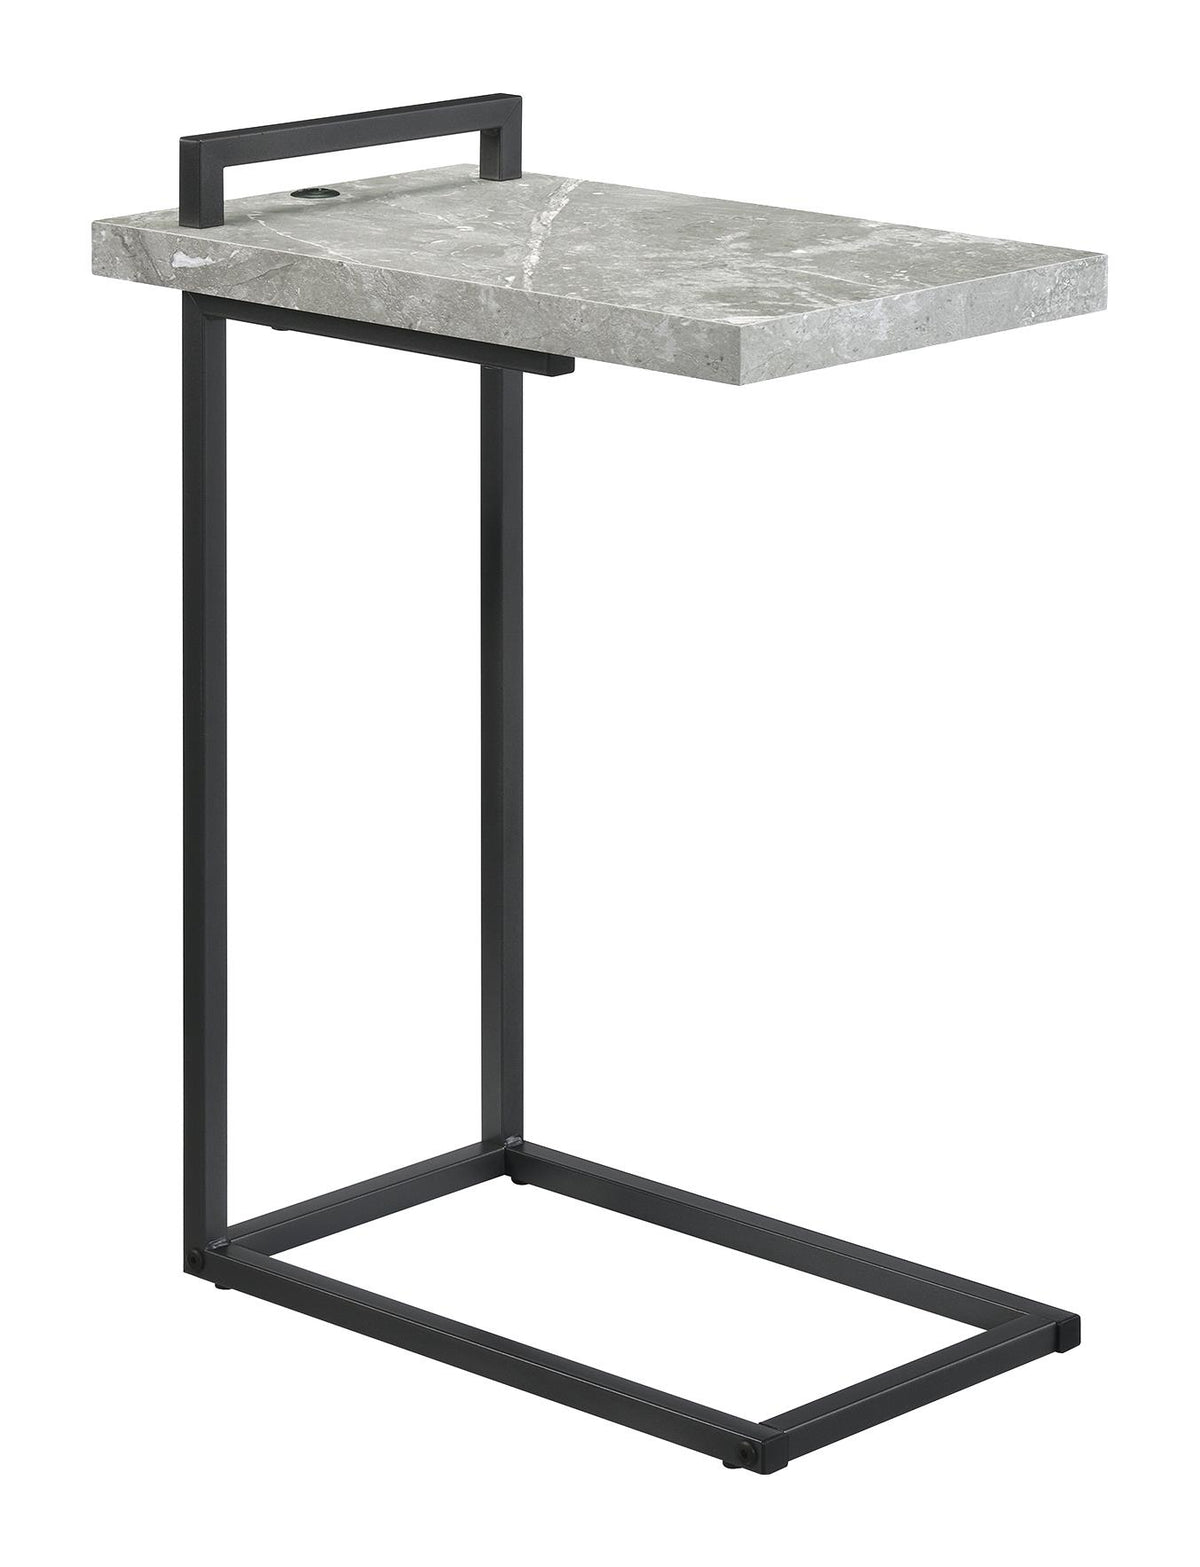 Maxwell C-shaped Accent Table Cement and Gunmetal Maxwell C-shaped Accent Table Cement and Gunmetal Half Price Furniture